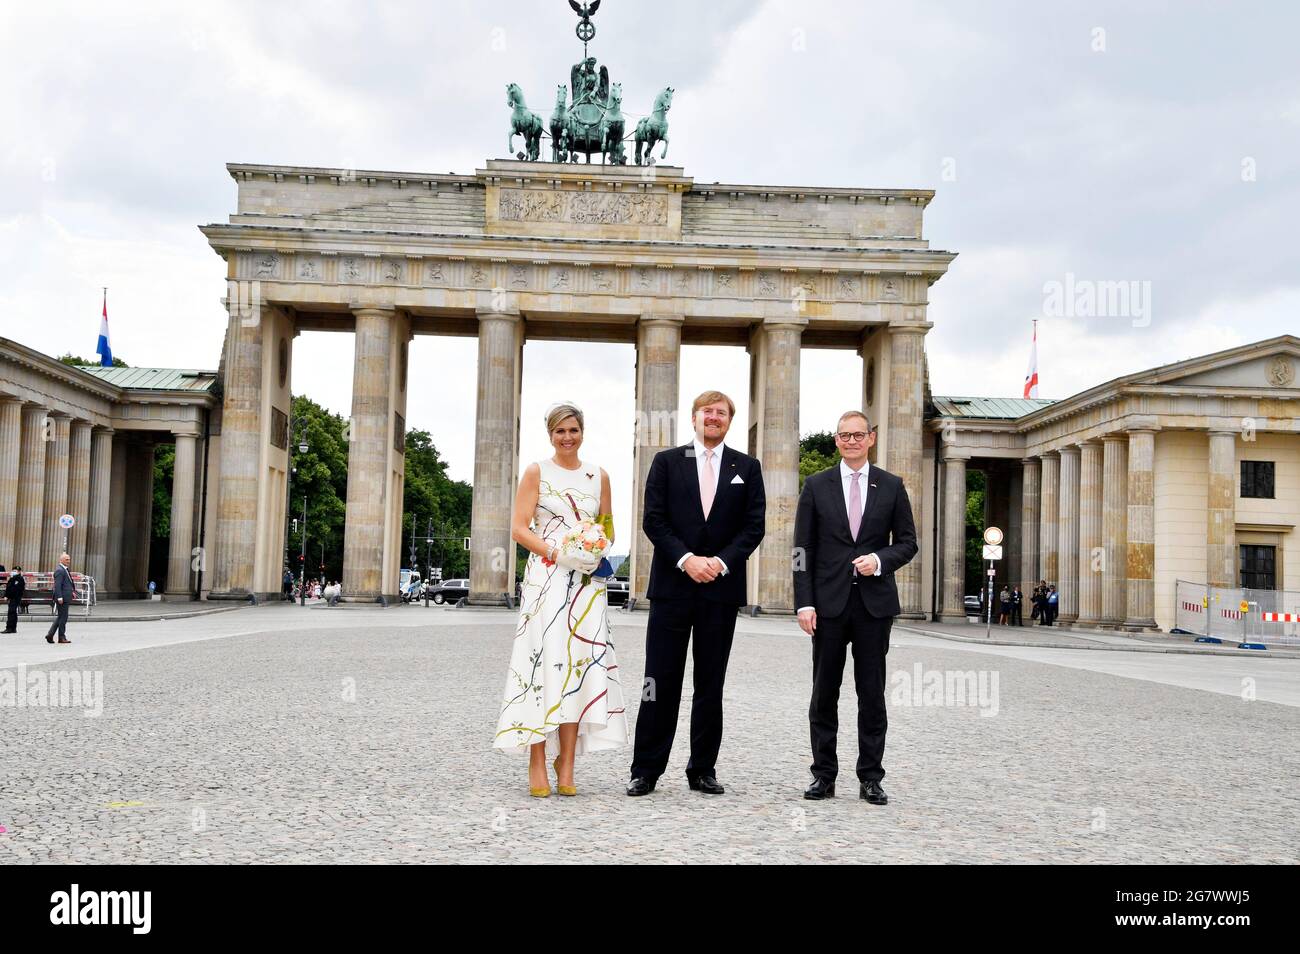 Queen Maxima, King Willem-Alexander of The Netherlands and Michael Mueller visit the Brandenburger Tor on July 5, 2021 in Berlin, Germany. Stock Photo